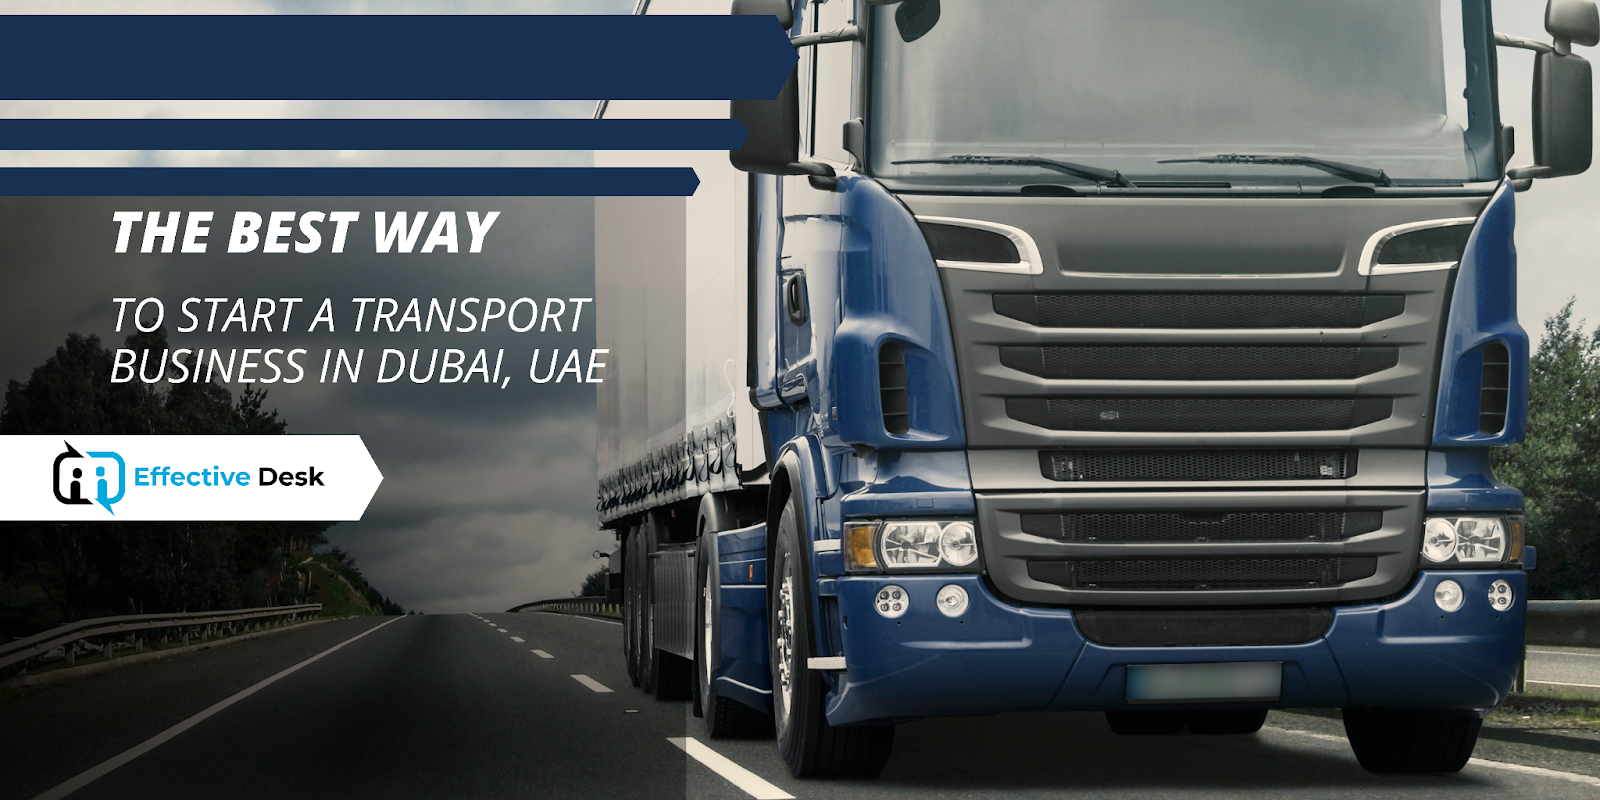 The Best Way to Start a Transport Business in Dubai, UAE